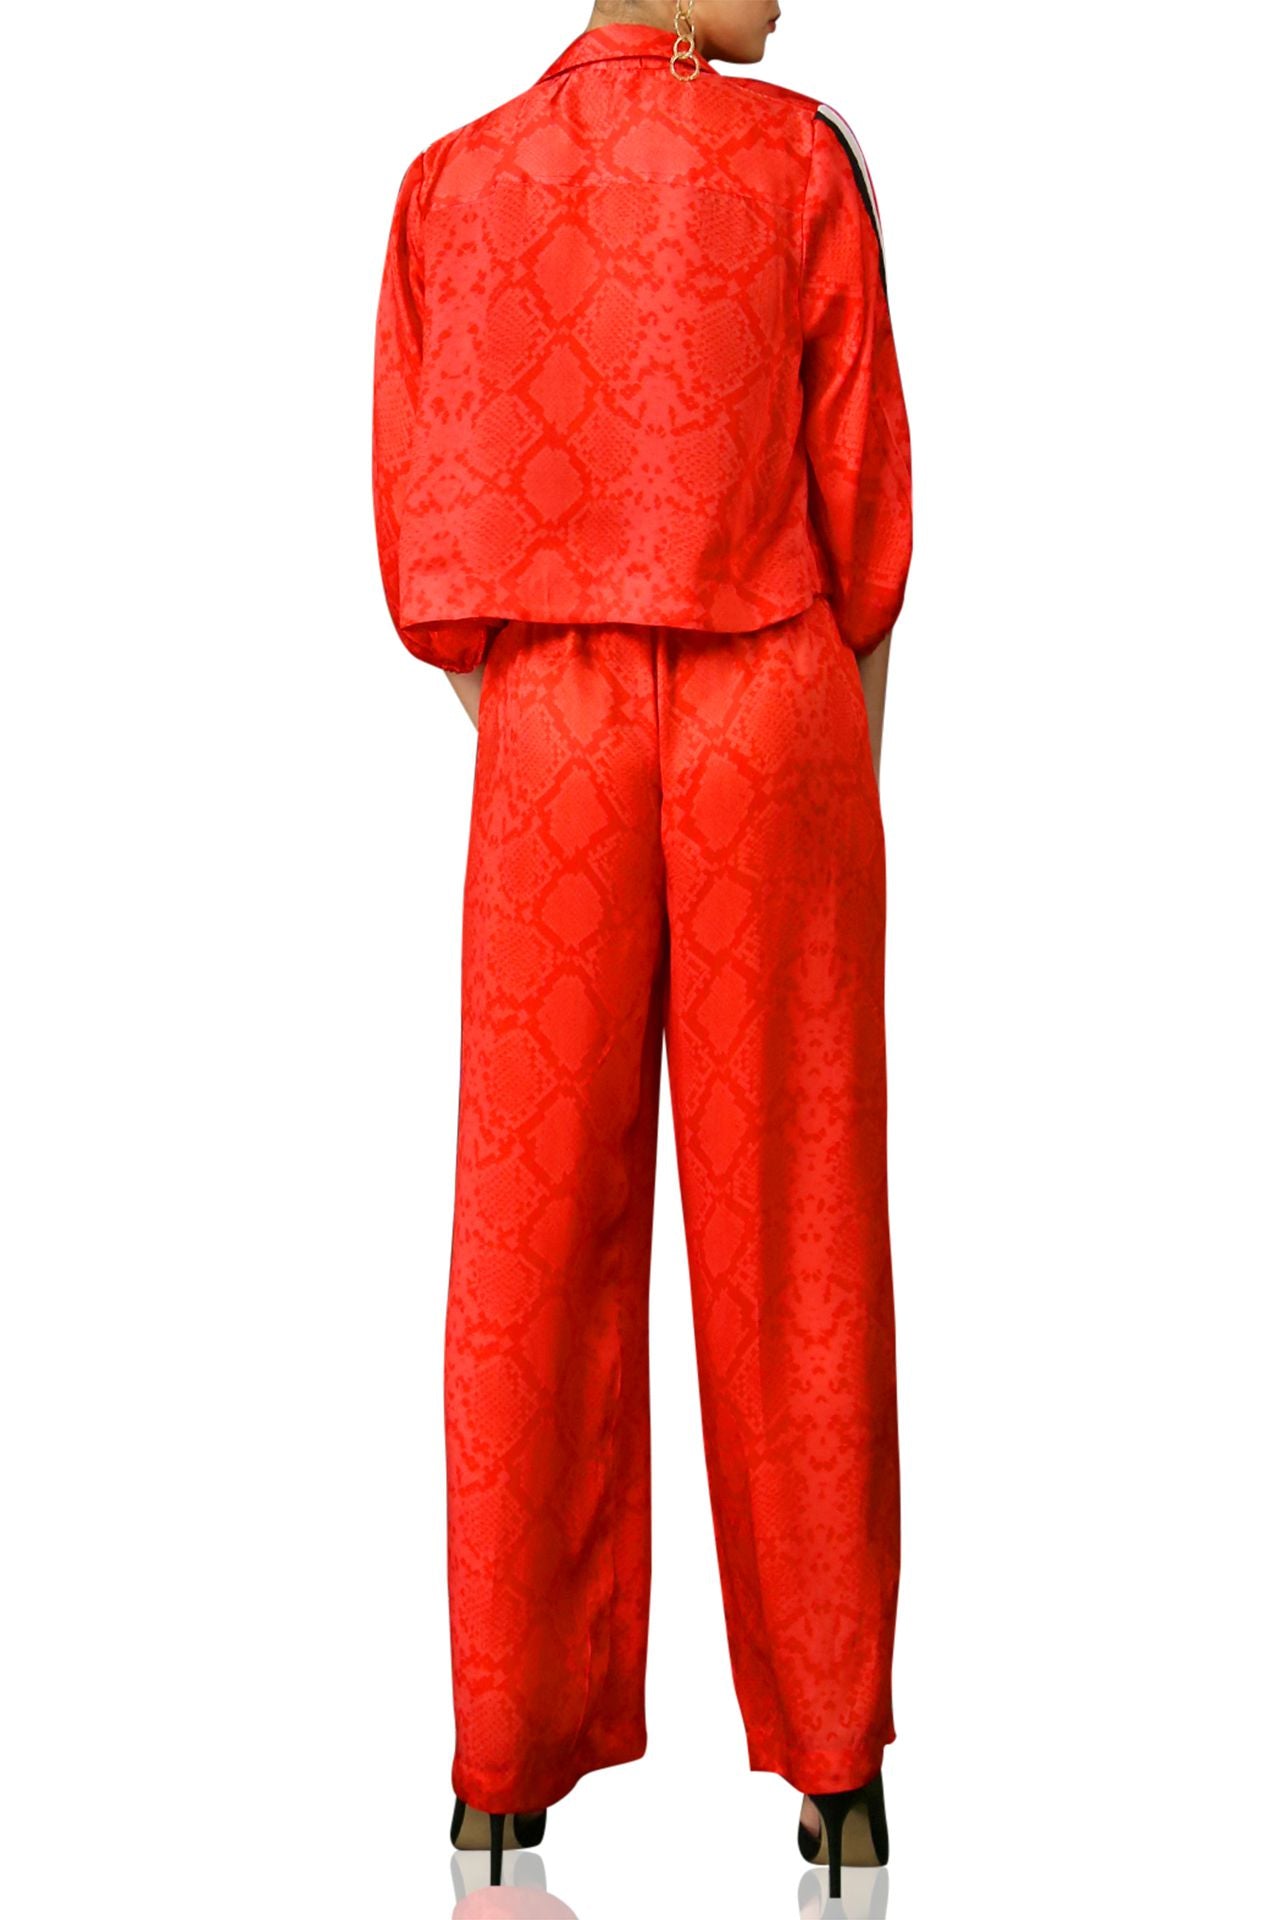 Matching Set Red Track Suit Cropped Jacket & Pant